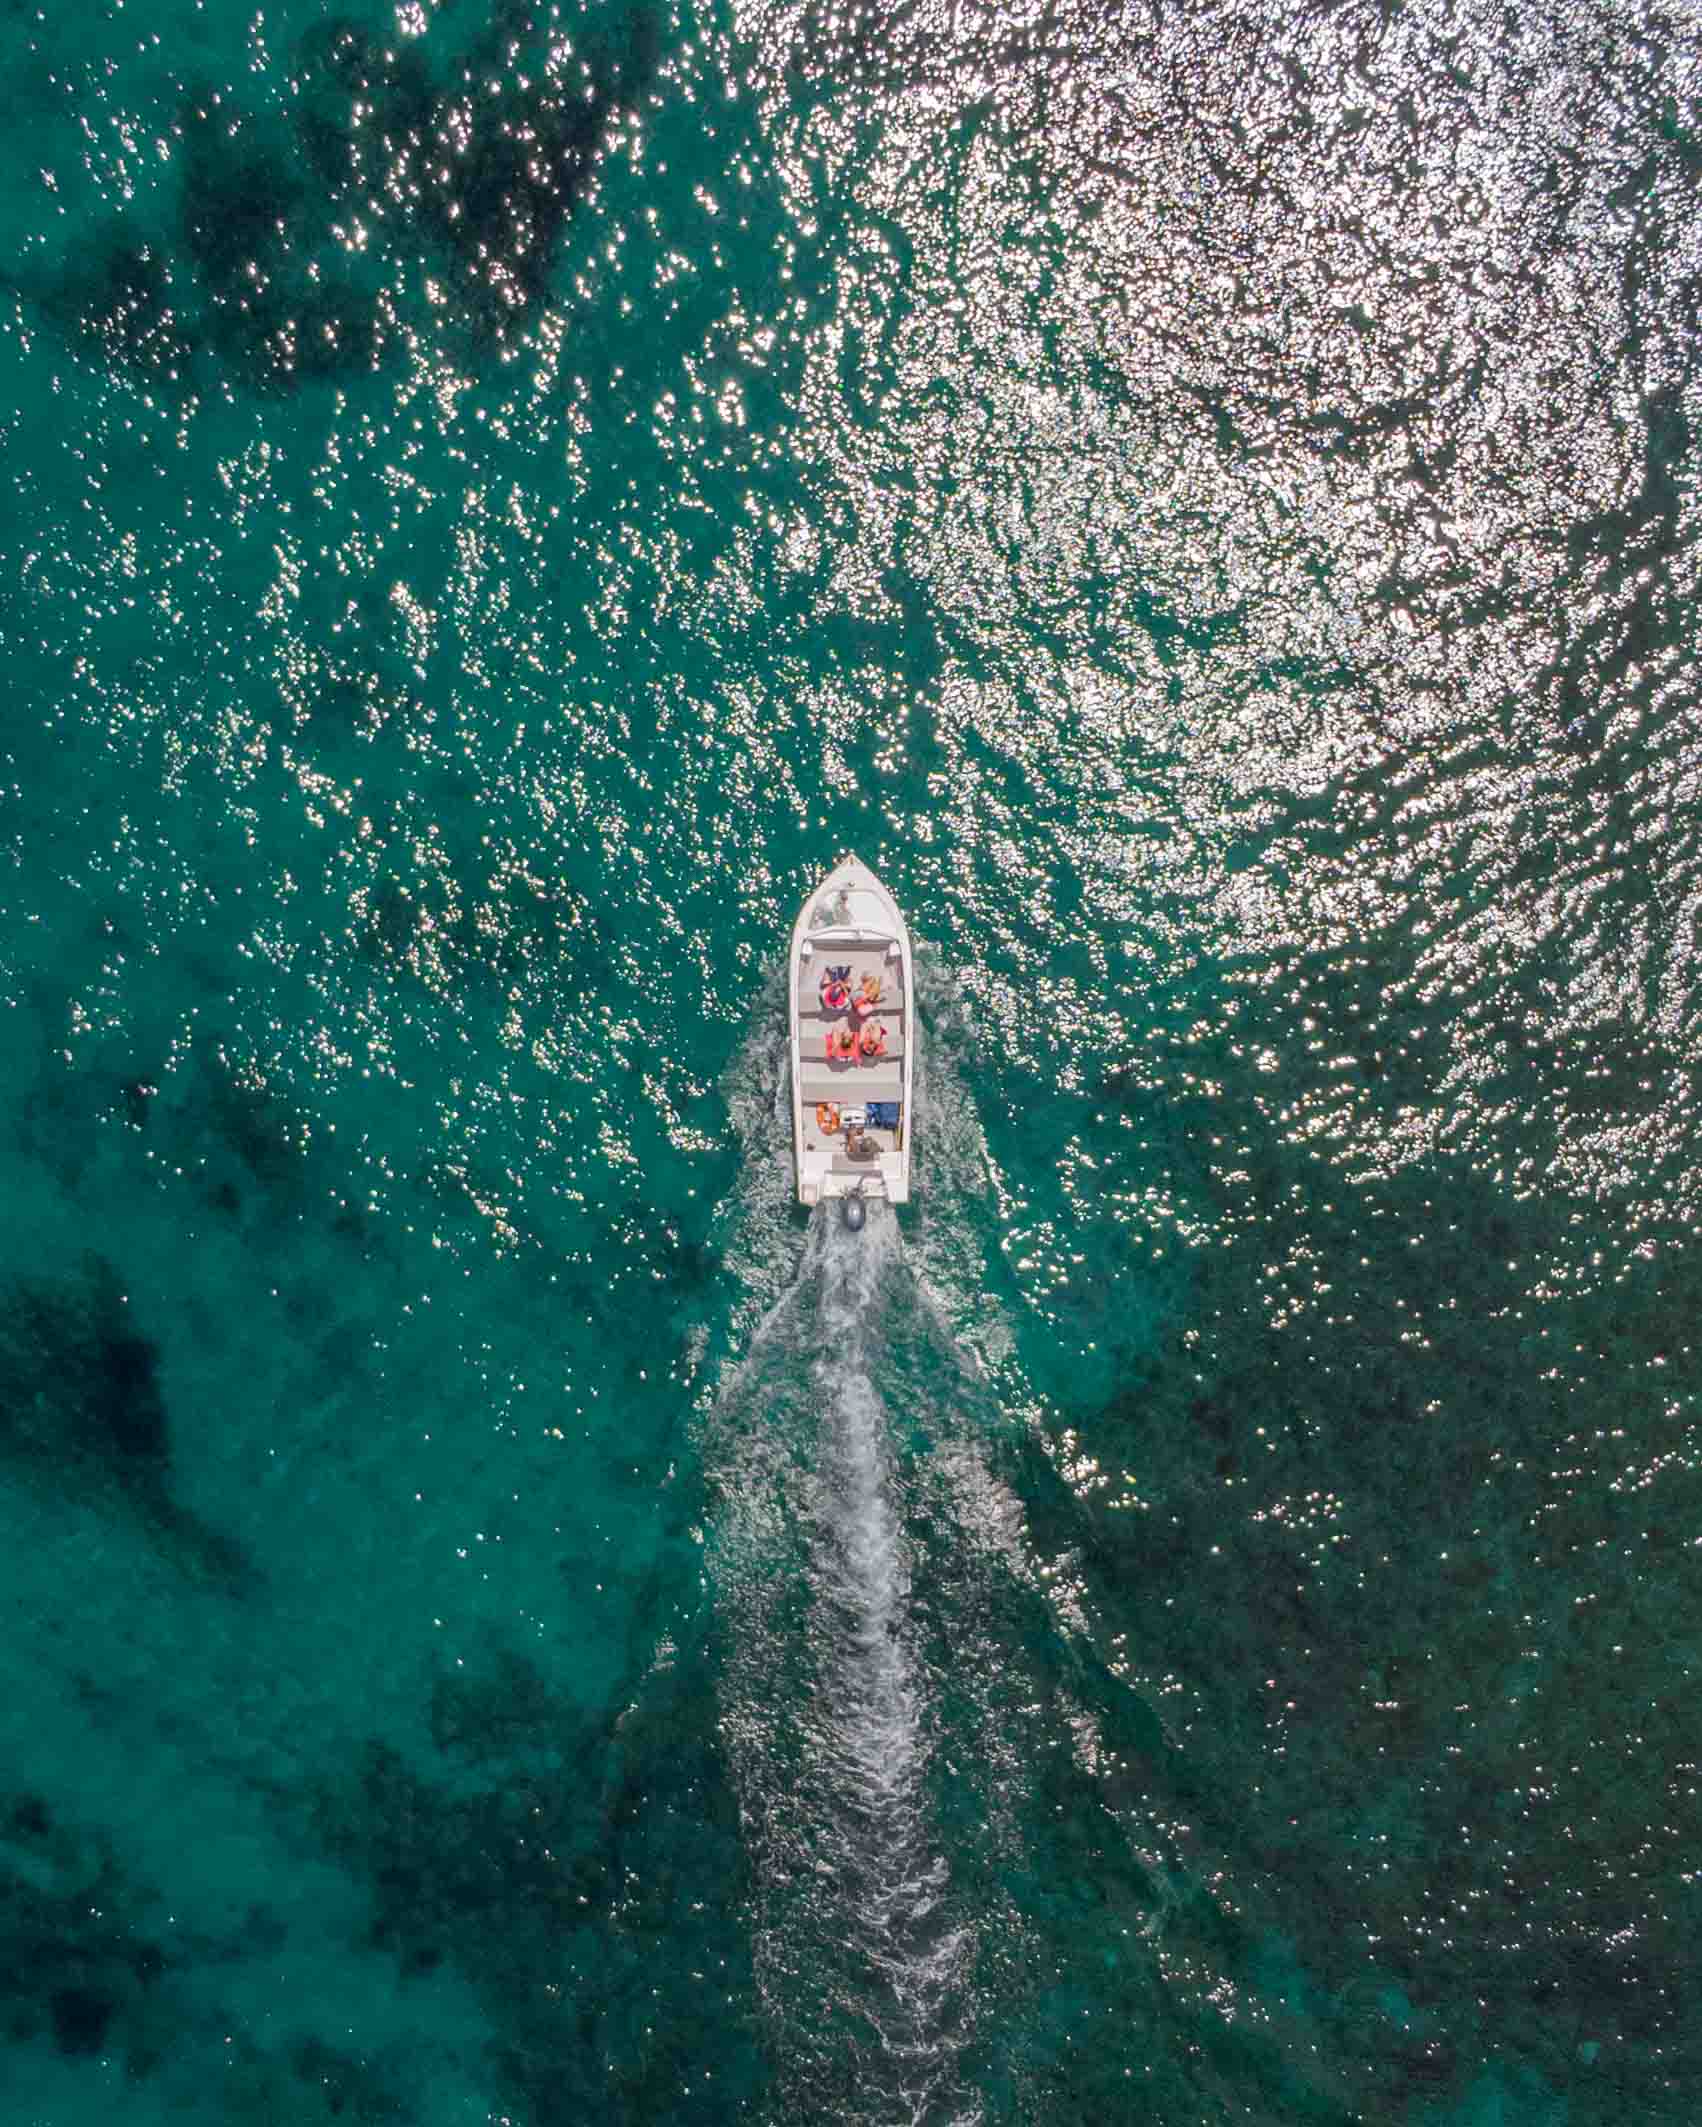 Boat from another perspective